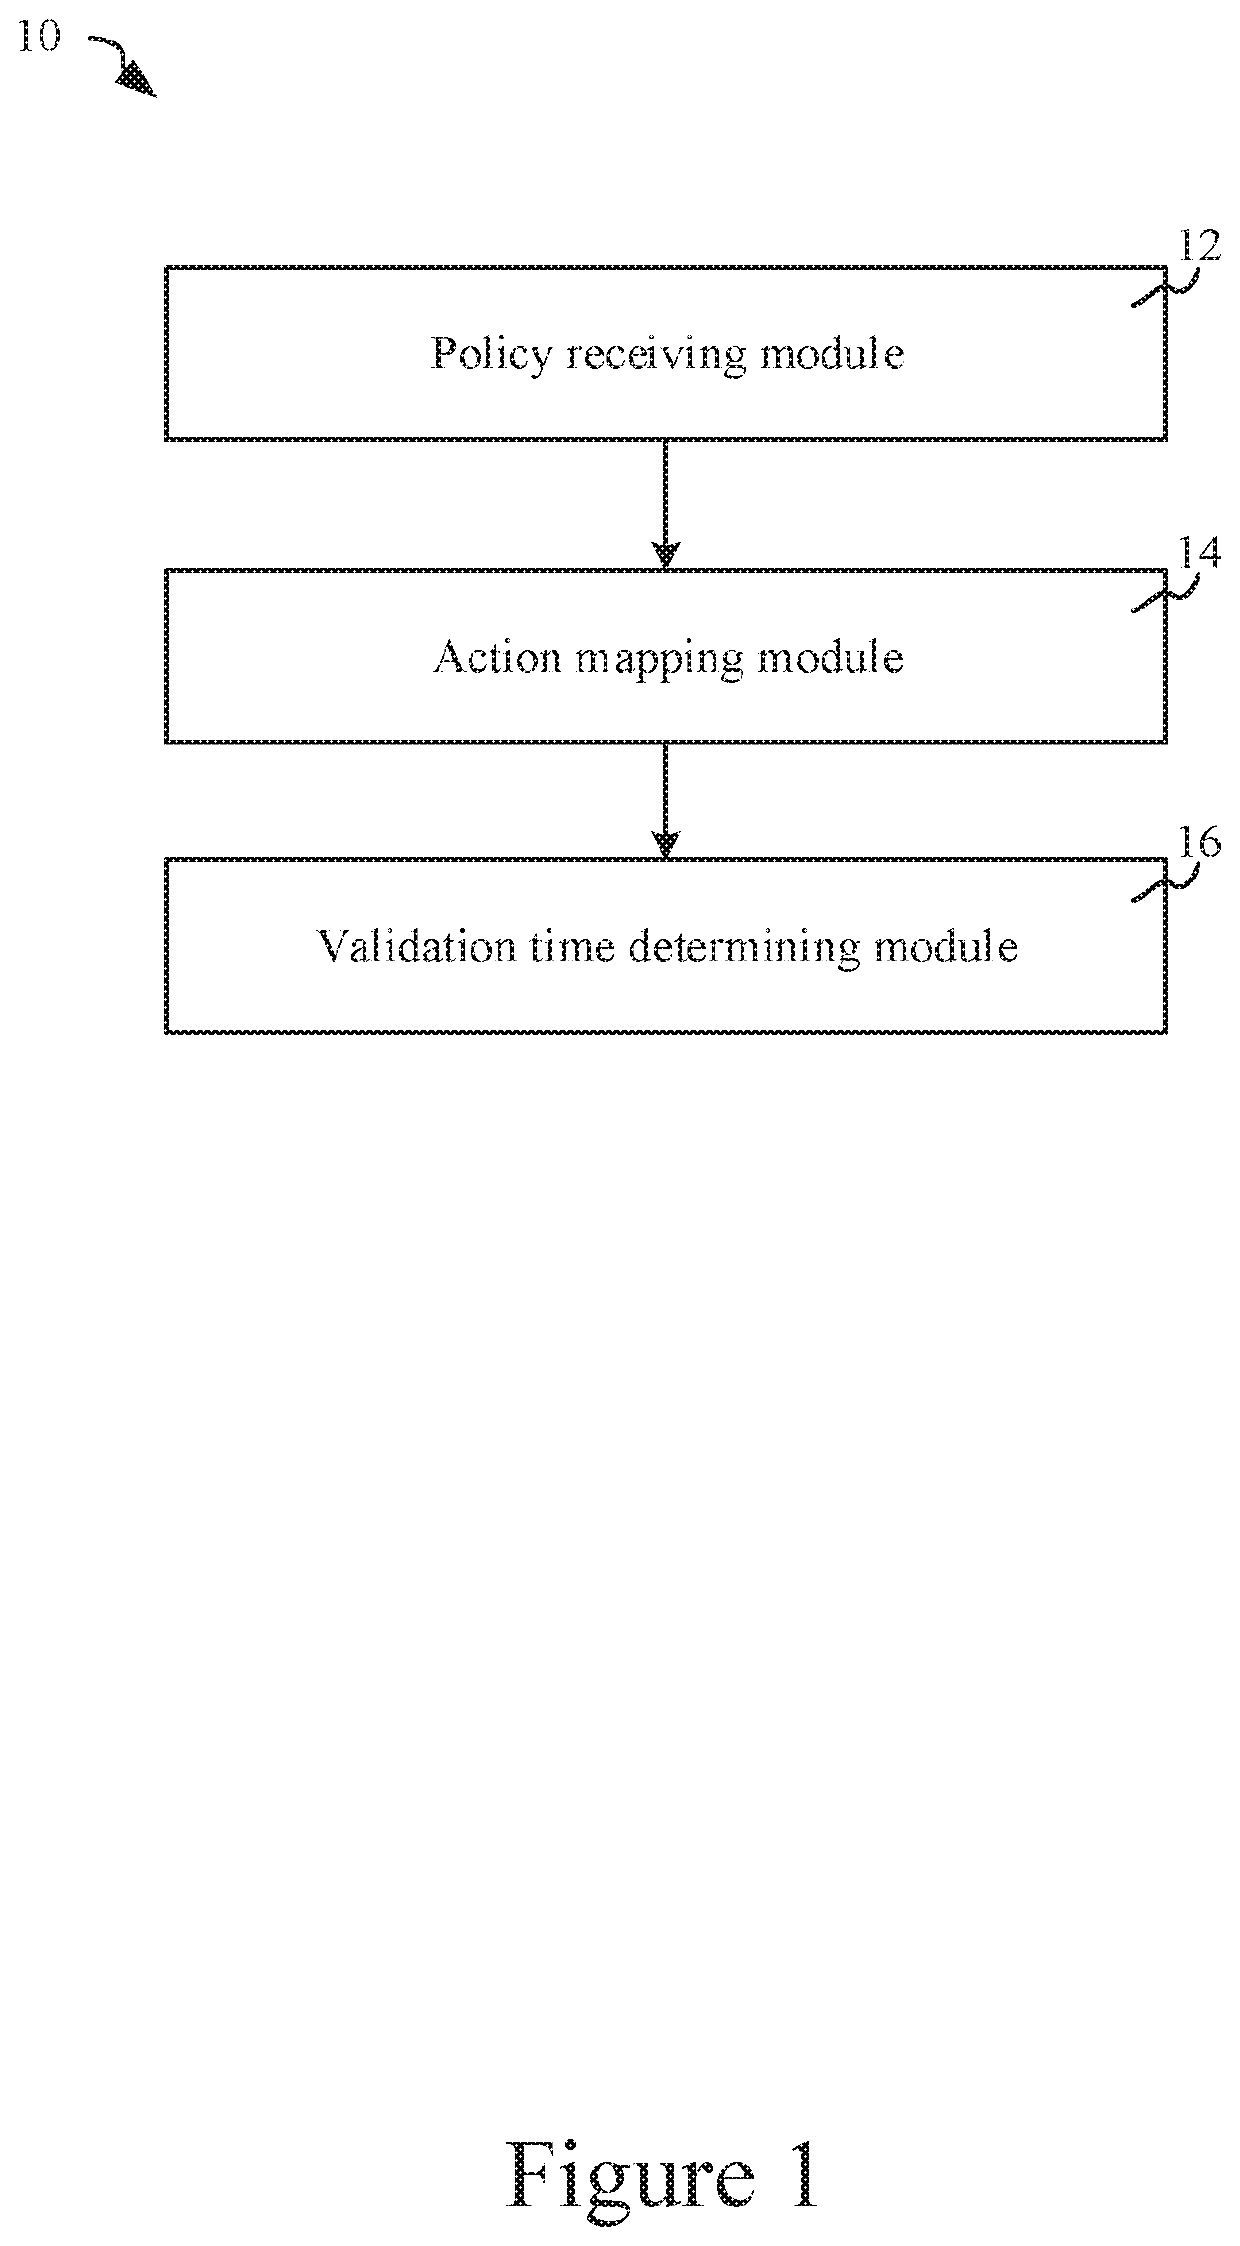 Systems and methods for determining validation times